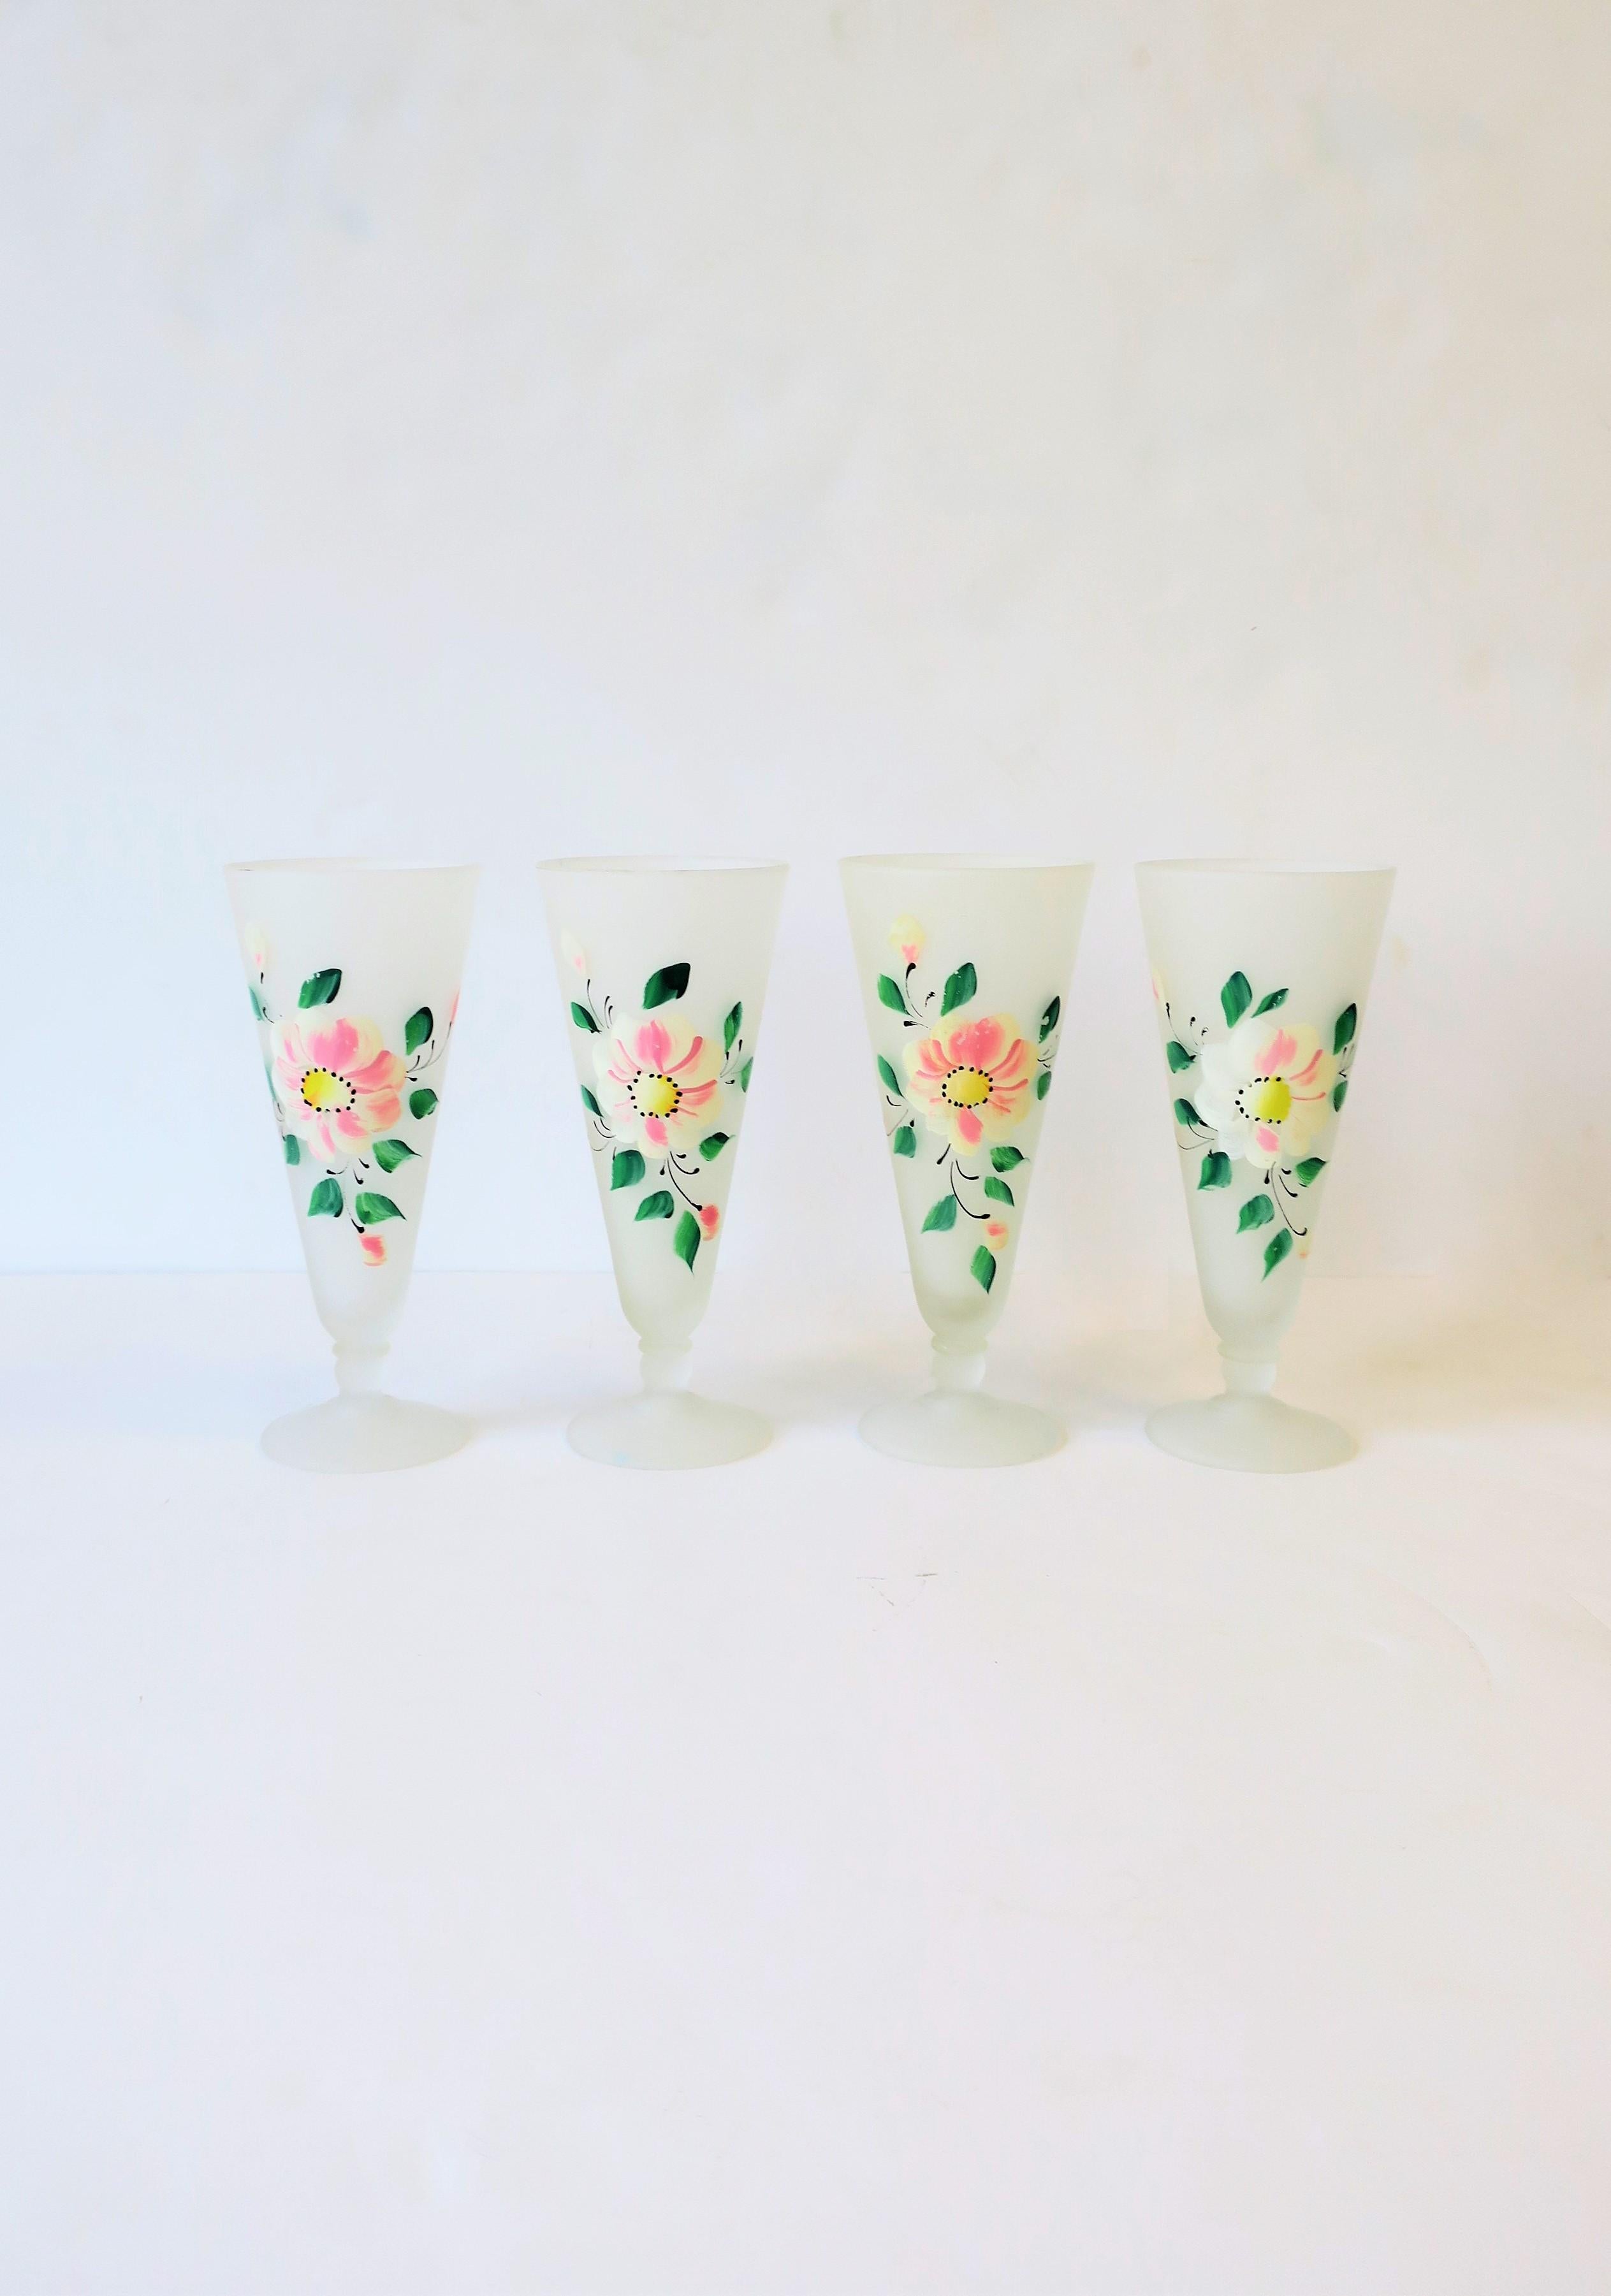 A beautiful set of four (4) white cocktail glasses with a hand painted floral 'chintz' design of large main flower, flower buds, and leaves, circa mid-20th century, USA. Colors include white, pink, yellow, green and a touch of black. A great